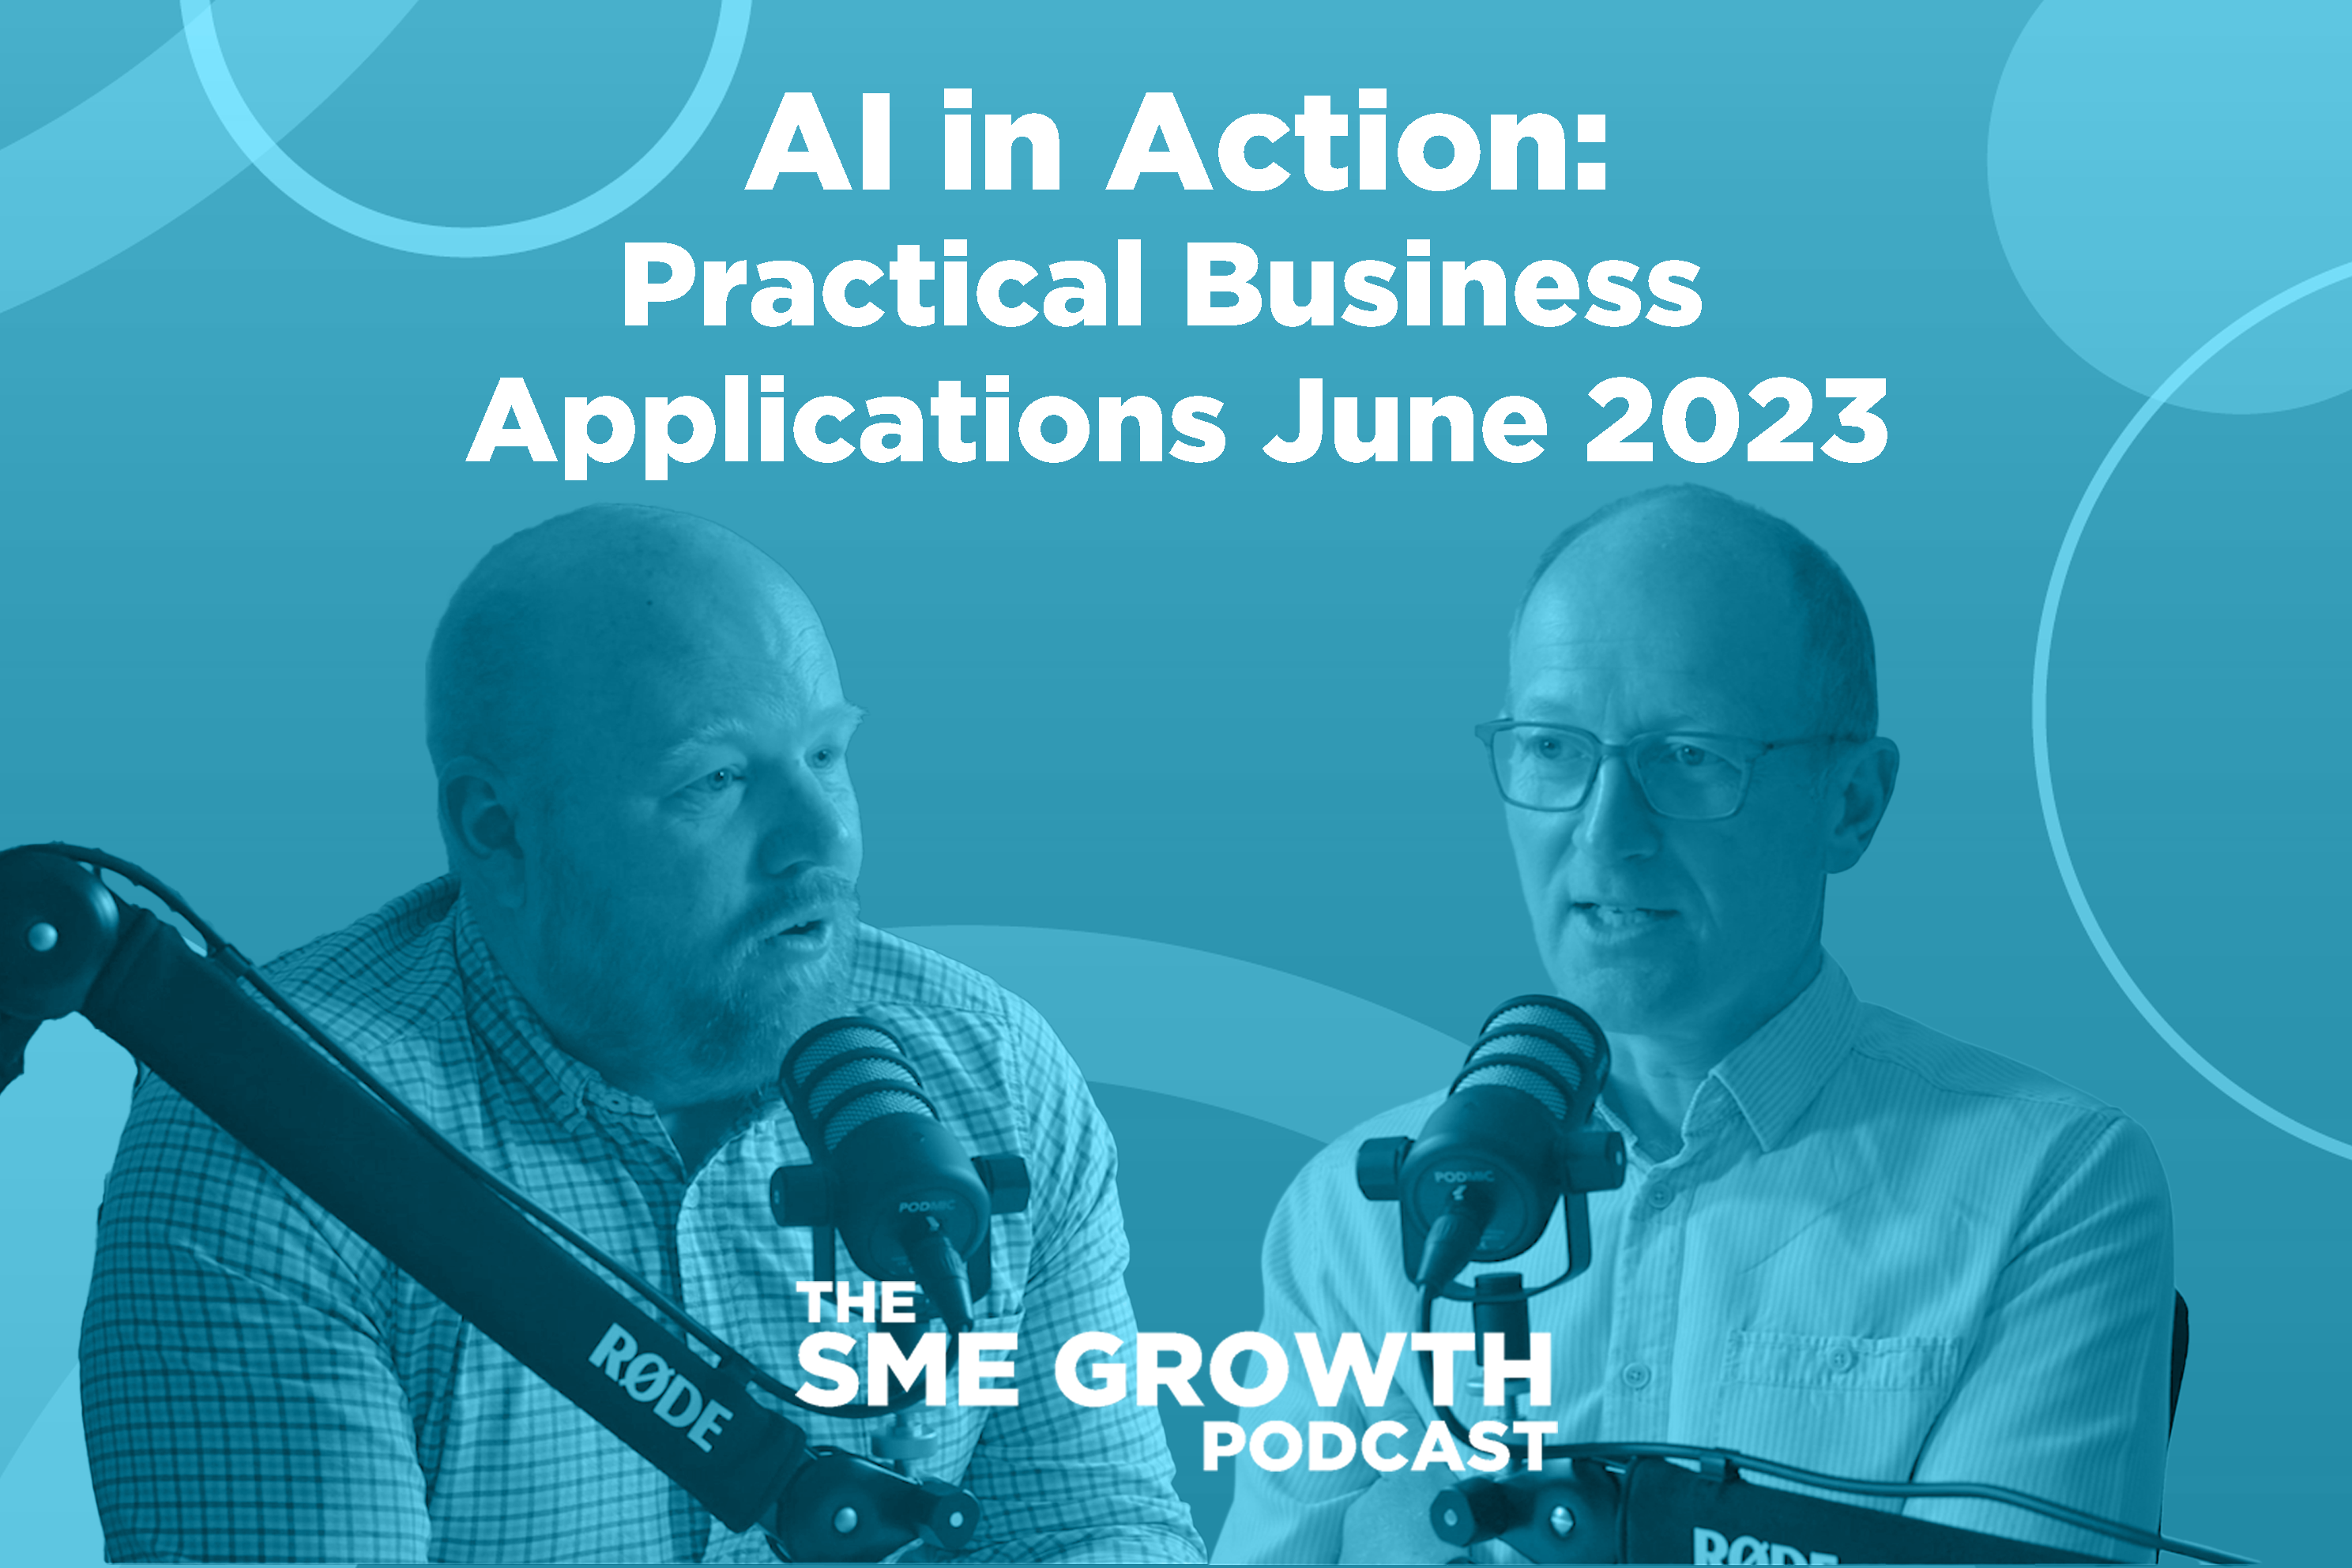 Ai in Action: Practical Business Applications June 2023 The SME Growth podcast. Blue banner with two males speaking into microphones.